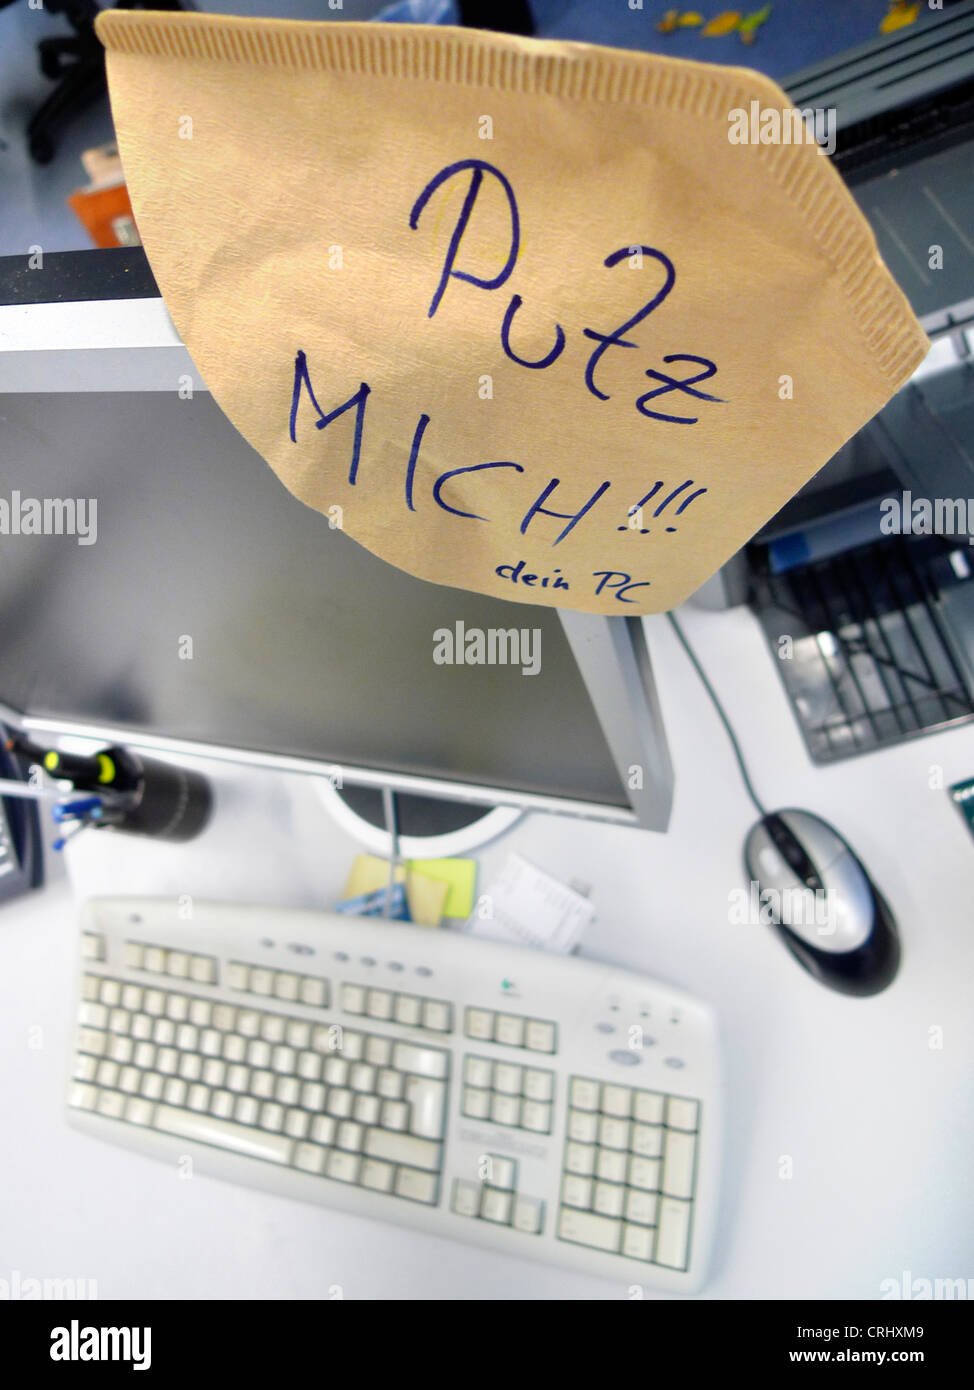 joke by a an office colleague, demand for cleaning the PC, tidy me up! Stock Photo